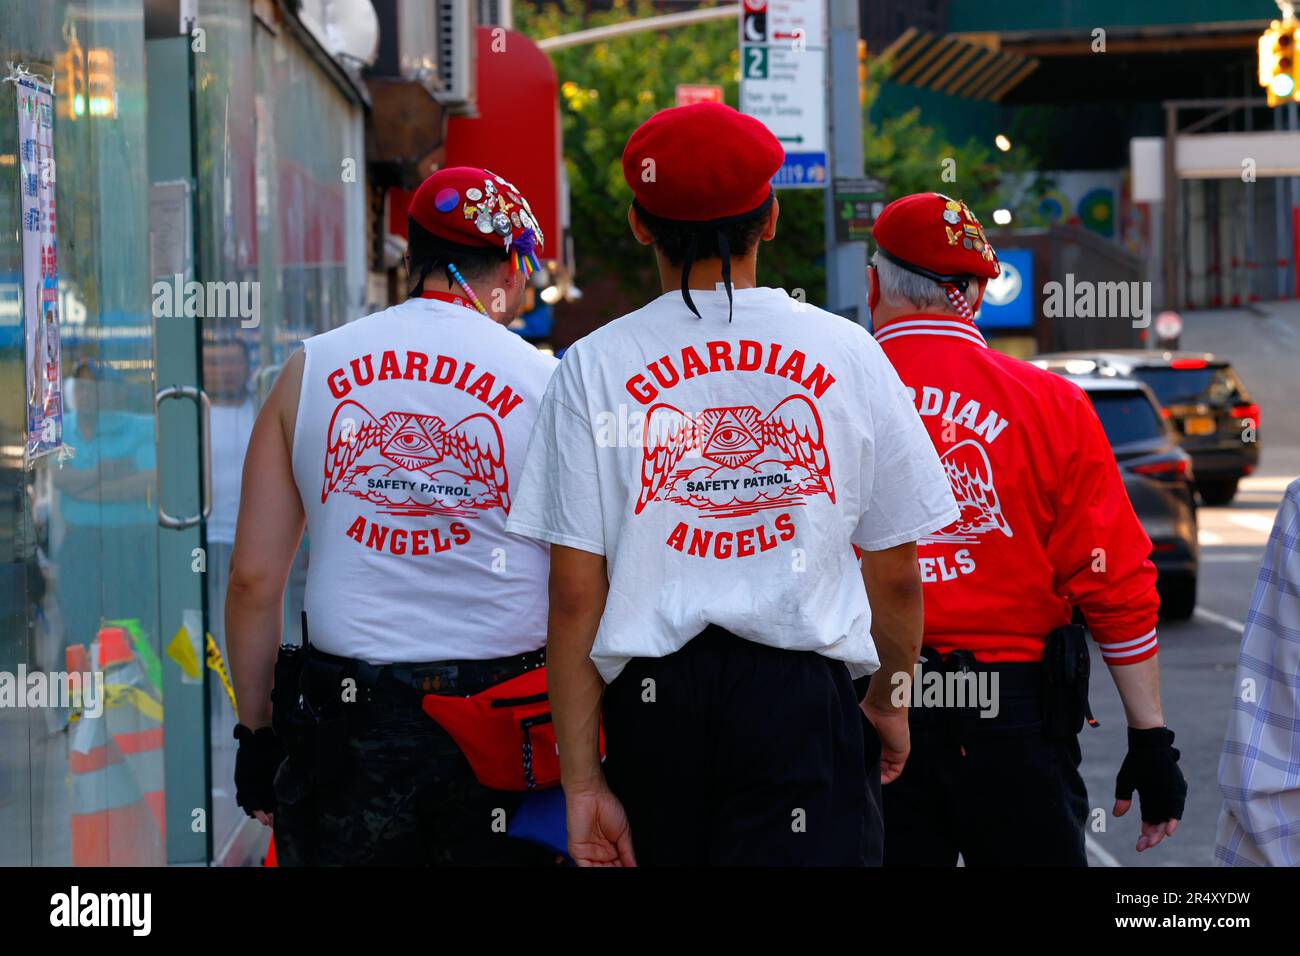 Members of the Guardian Angels safety patrol organization on a Manhattan Chinatown street. Stock Photo